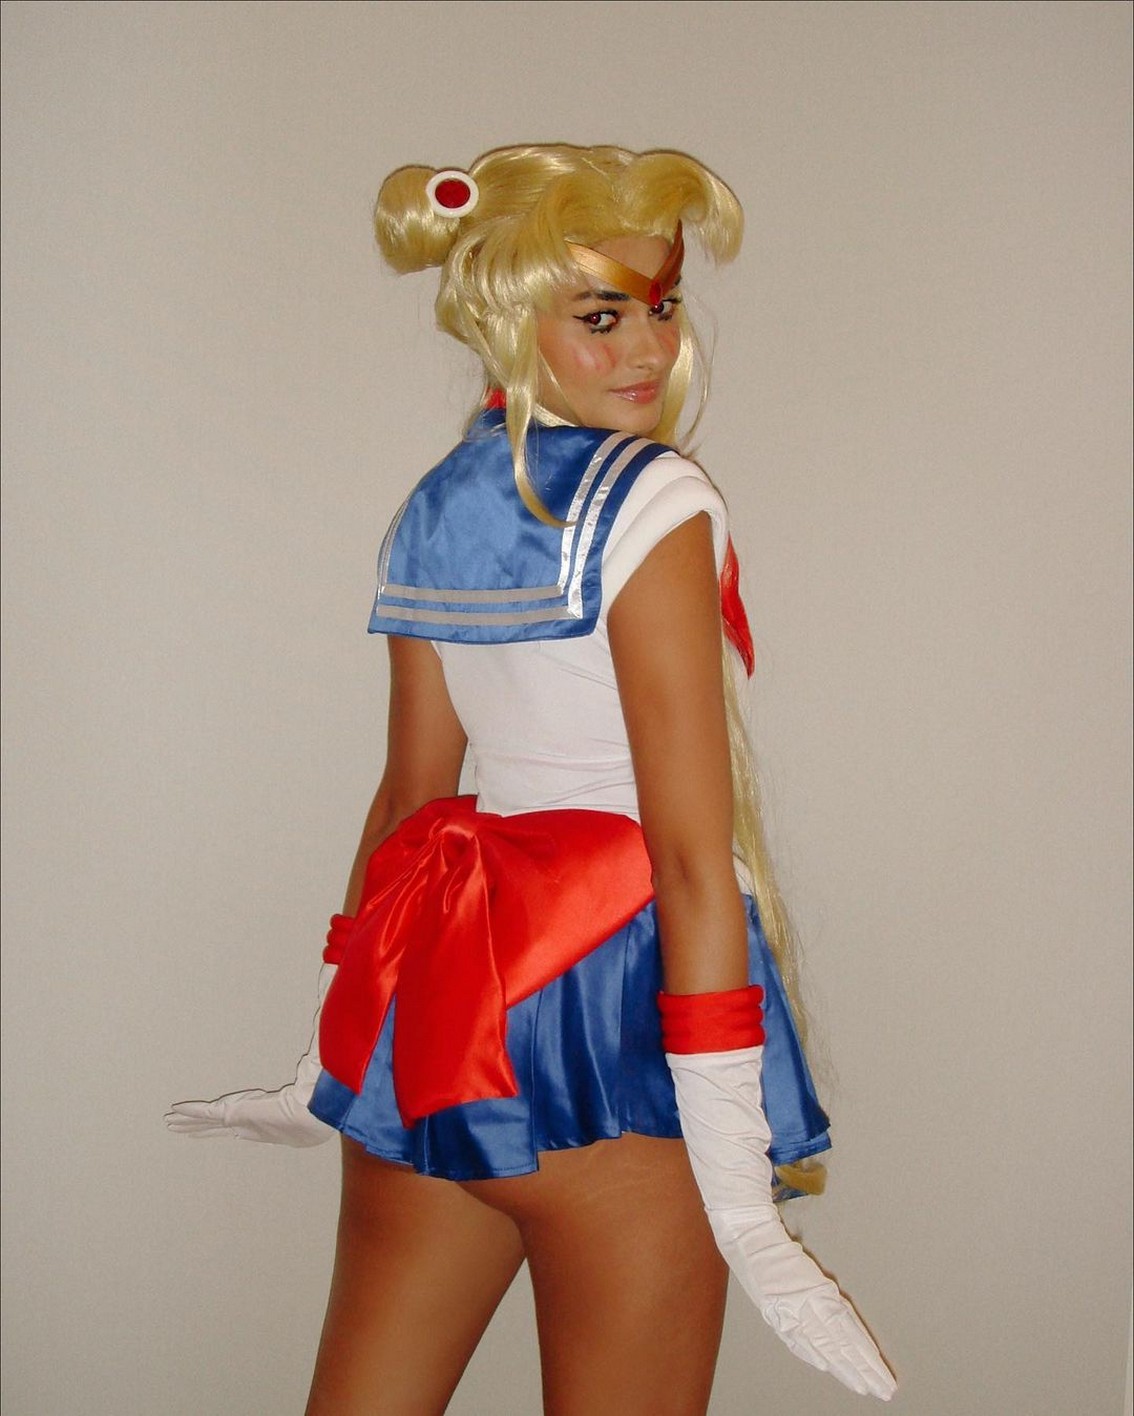 Gizele Oliveira steered clear of traditional Halloween scares and instead wowed her fans with a daring Sailor Moon cosplay. Opting for a sexy twist, she flaunted her curves in a short skirt that left little to the imagination, proving once again that she knows how to keep her followers on the edge of their seats.